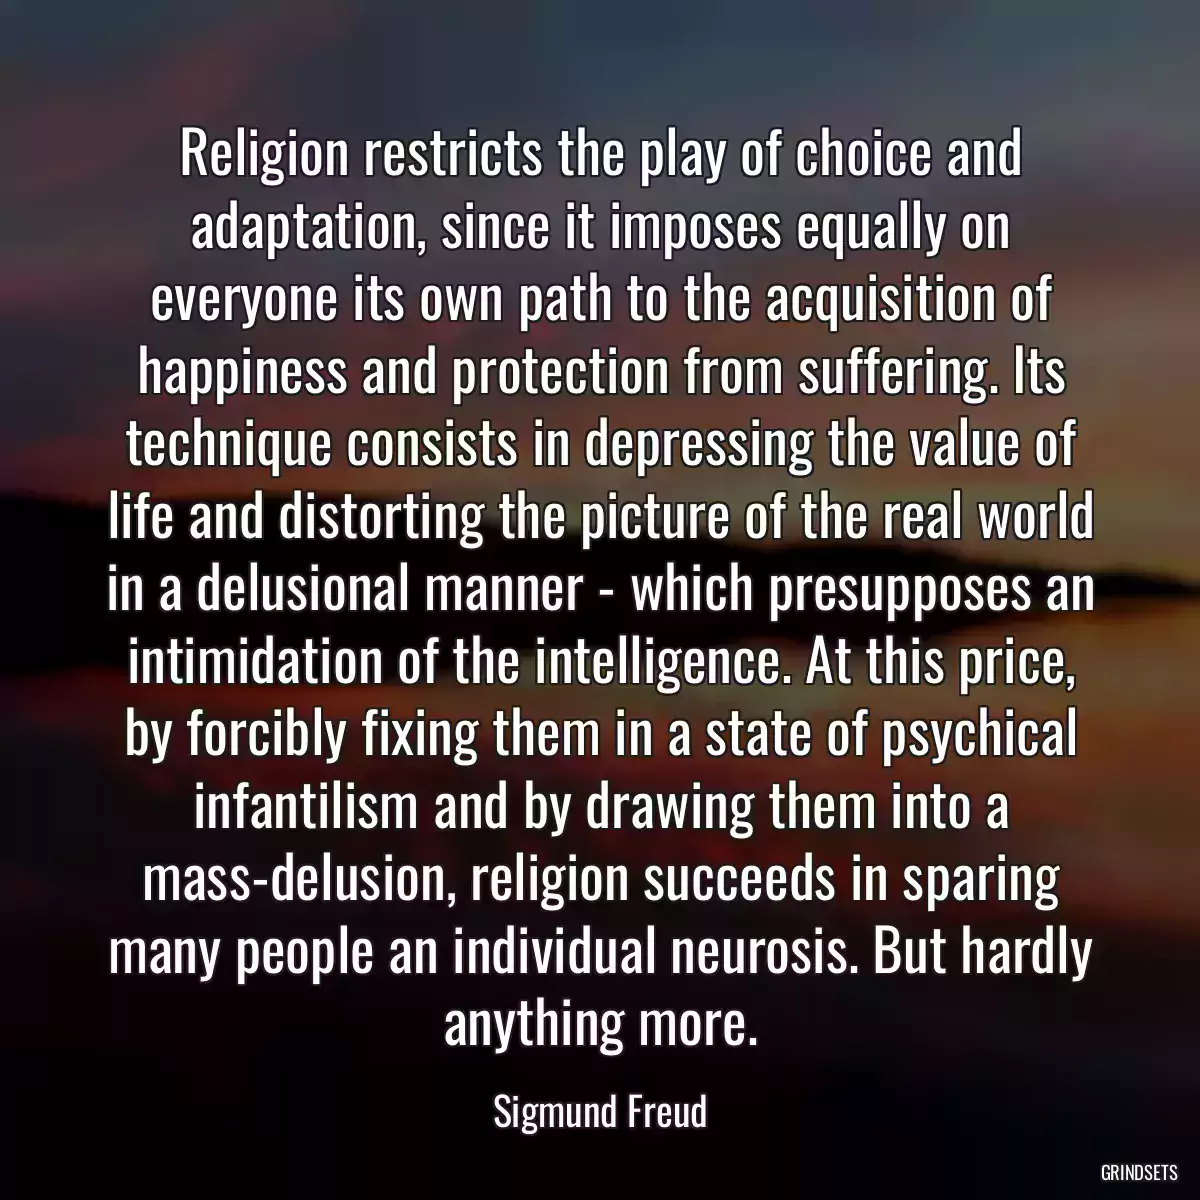 Religion restricts the play of choice and adaptation, since it imposes equally on everyone its own path to the acquisition of happiness and protection from suffering. Its technique consists in depressing the value of life and distorting the picture of the real world in a delusional manner - which presupposes an intimidation of the intelligence. At this price, by forcibly fixing them in a state of psychical infantilism and by drawing them into a mass-delusion, religion succeeds in sparing many people an individual neurosis. But hardly anything more.